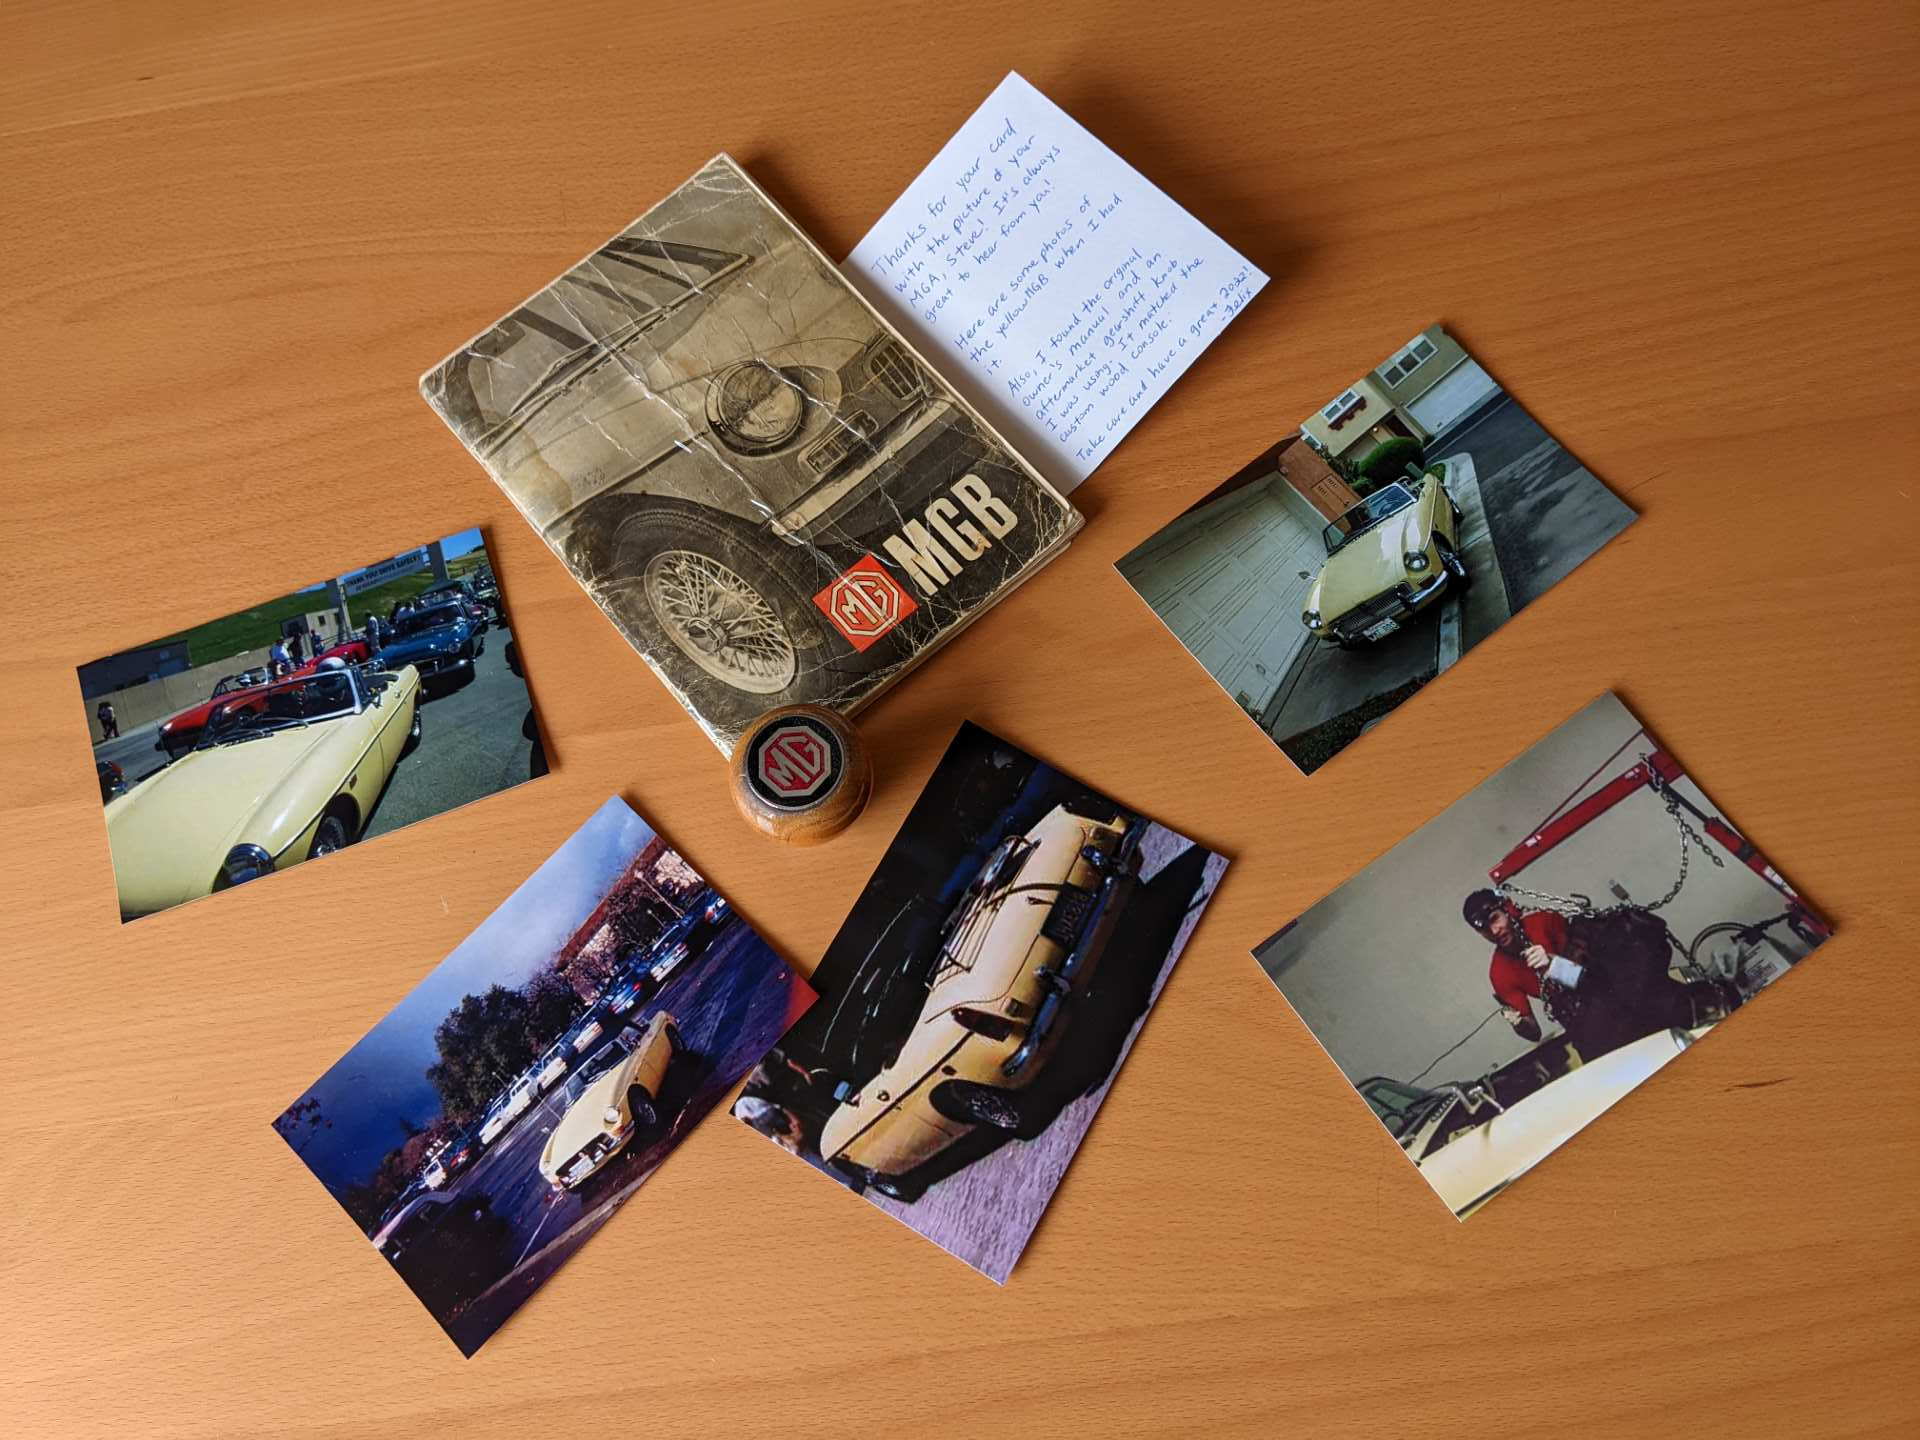 The wood MG gearshift knob, original MGB handbook, card and photos I sent Steve, the current owner of my former yellow MGB.